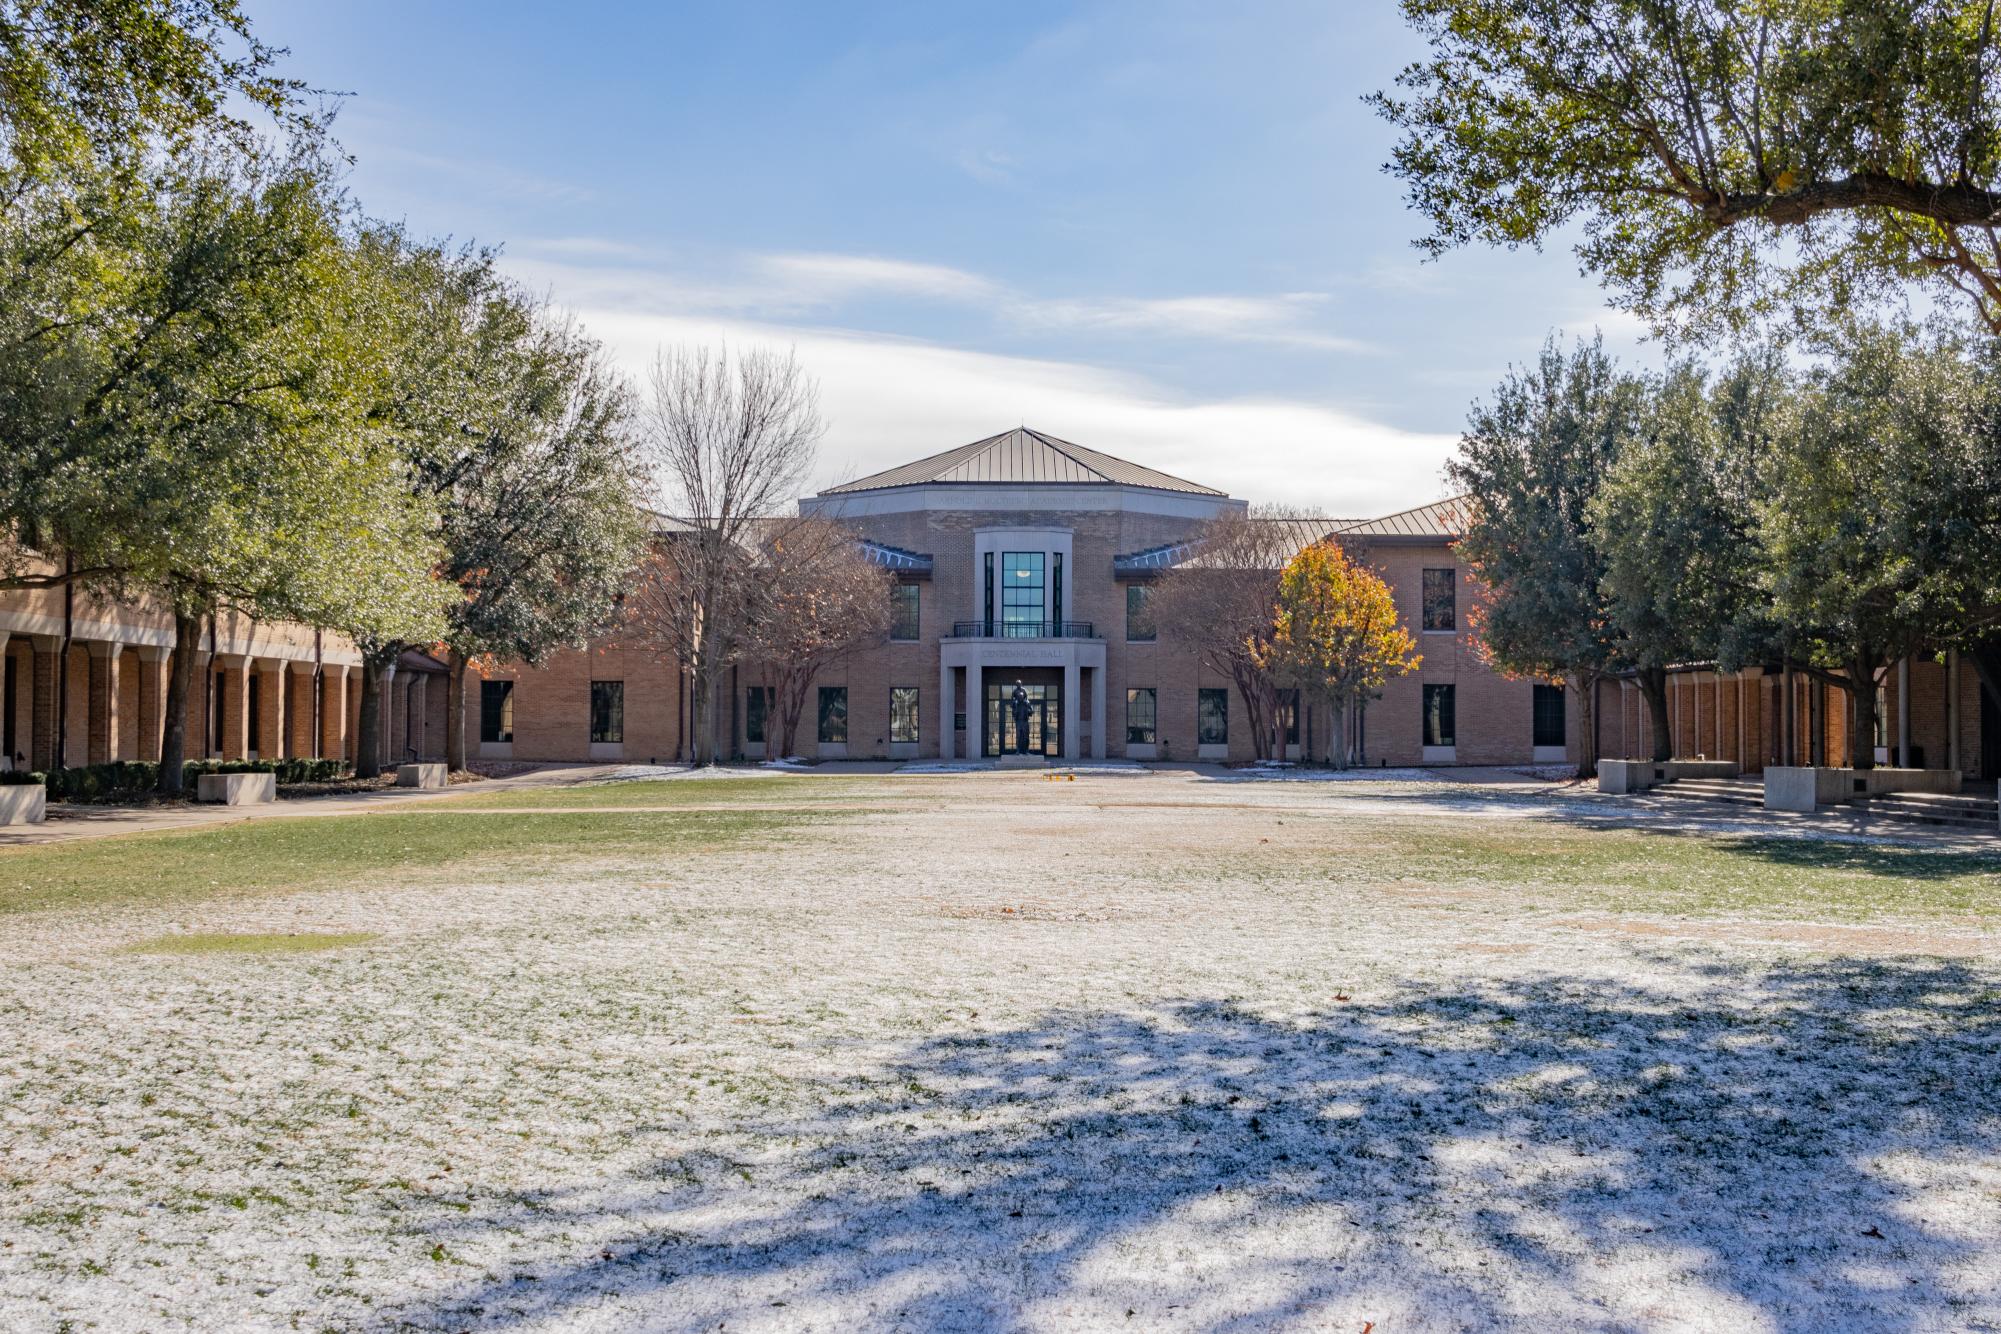 The campus was covered in a thin layer of snow, however school was not canceled.